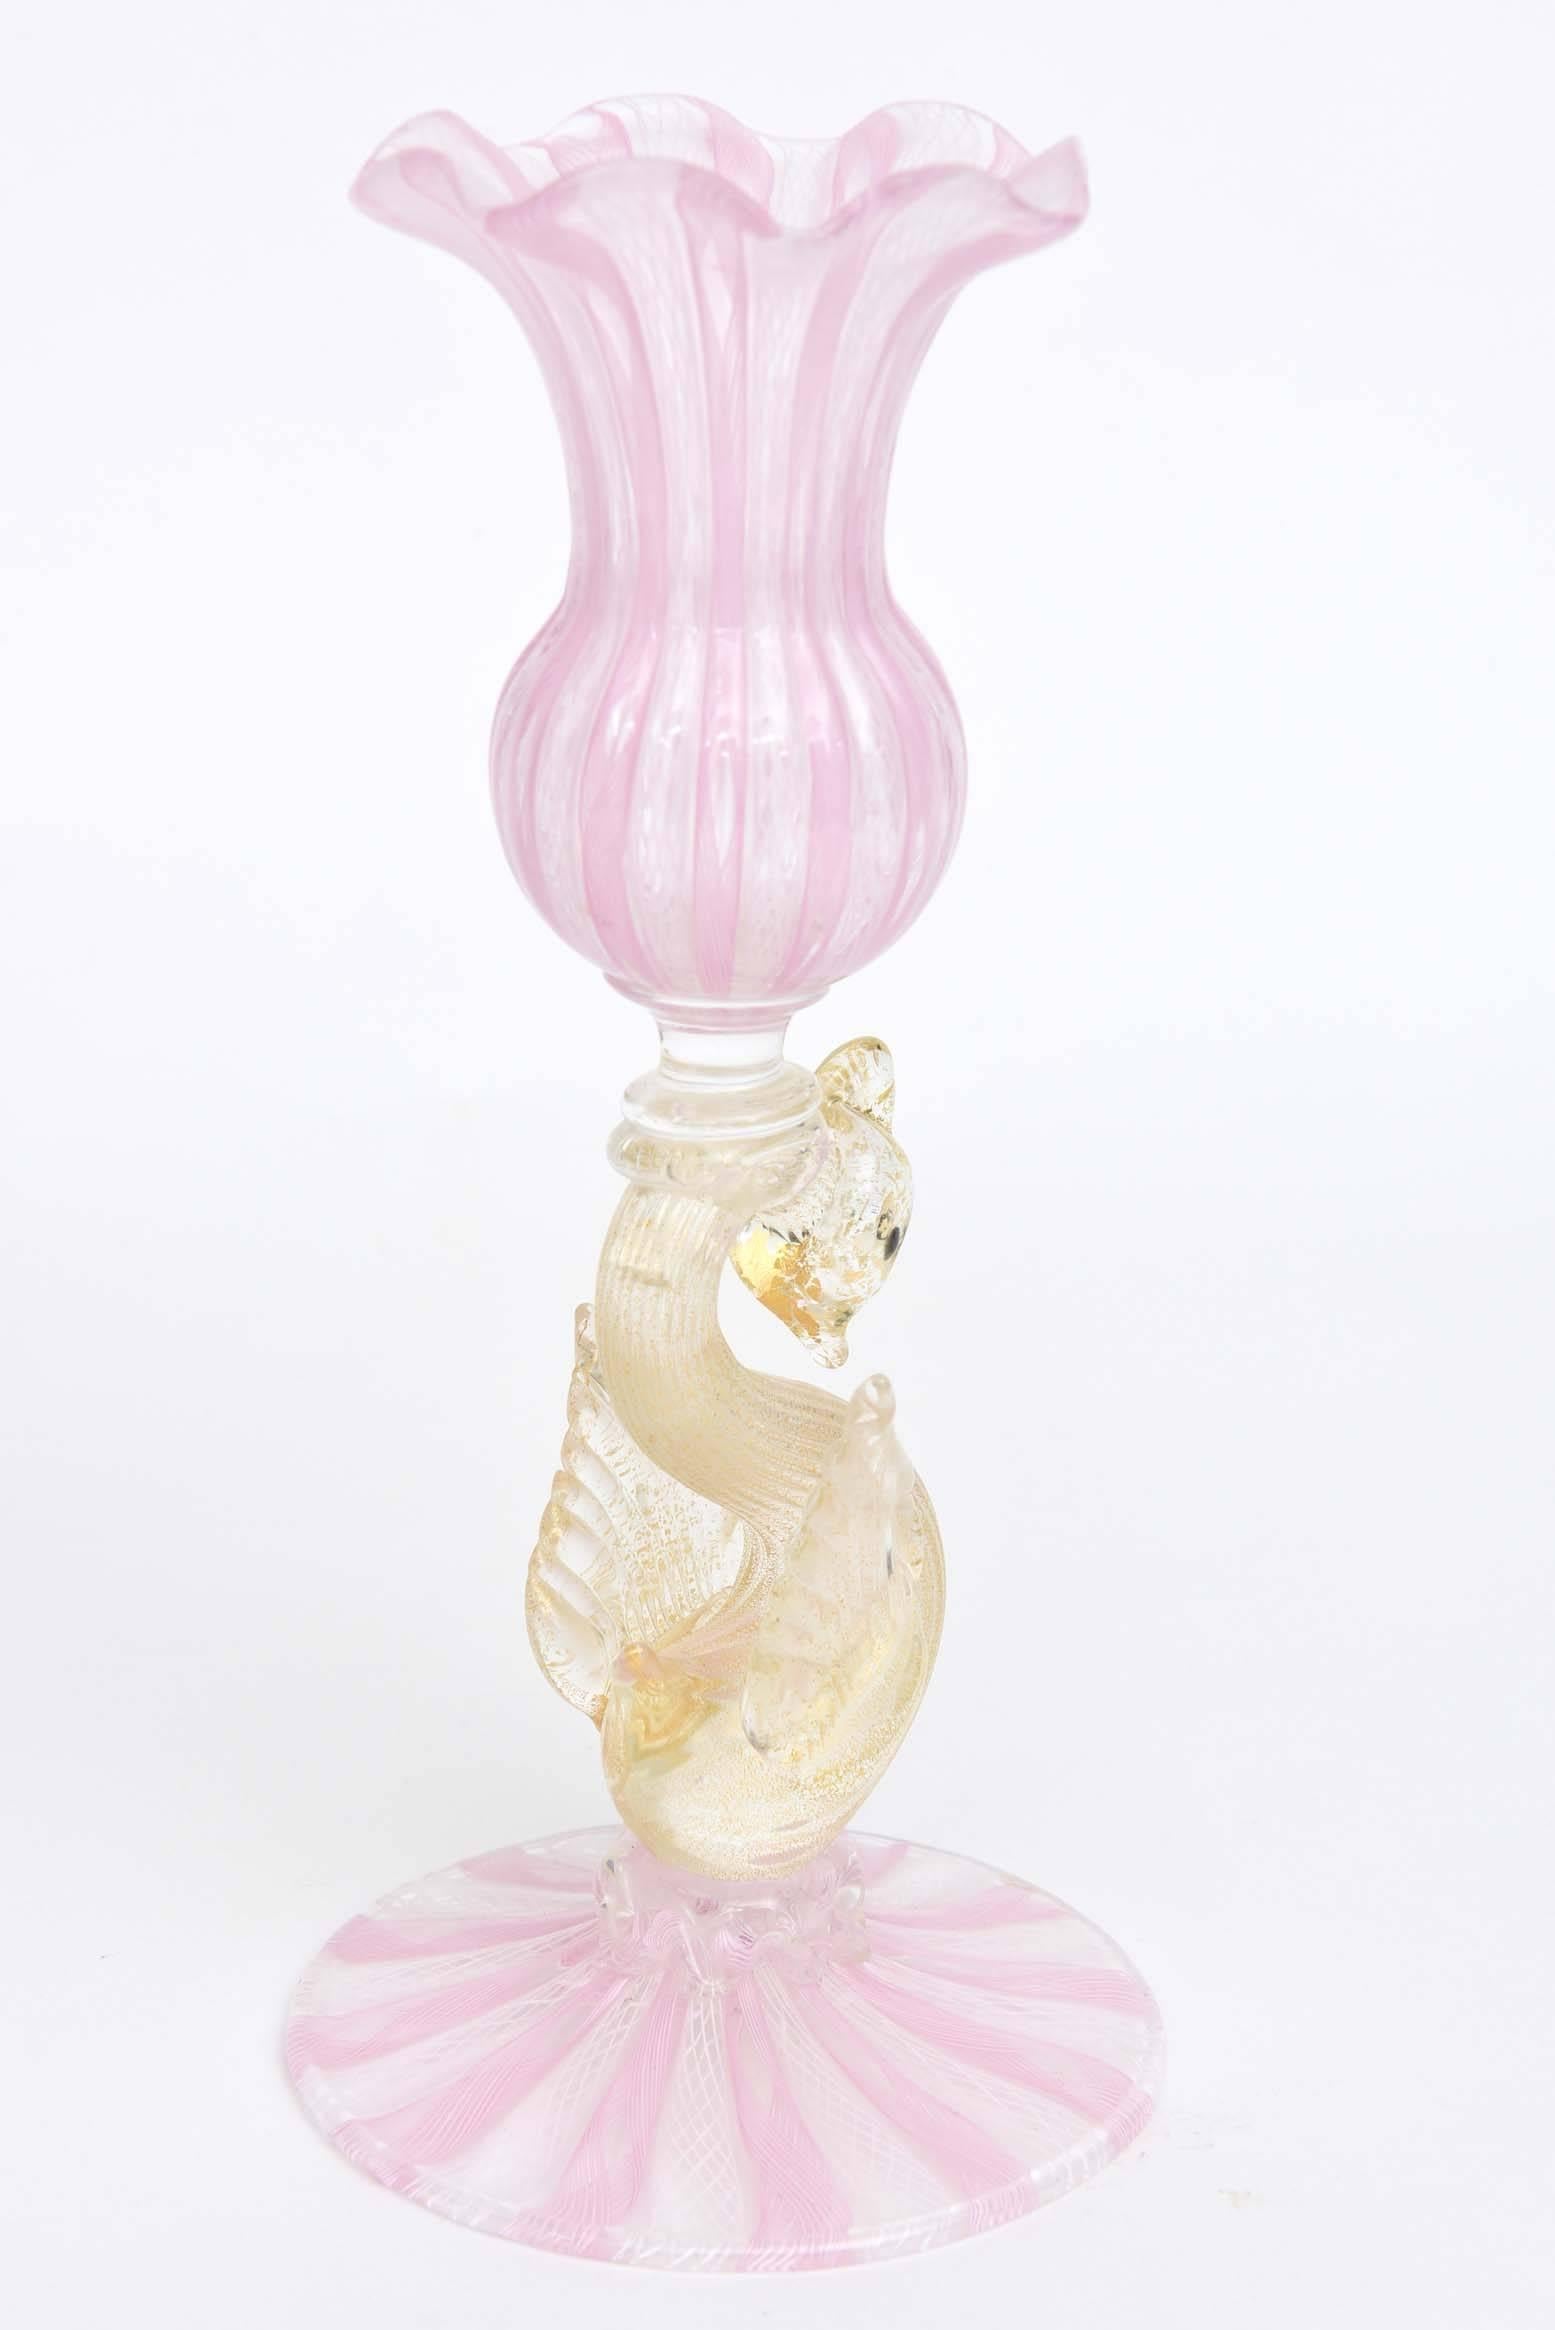 Mid-20th Century Pair of Venetian Glass Candlesticks, Pink and White Latticino with Figural Swans